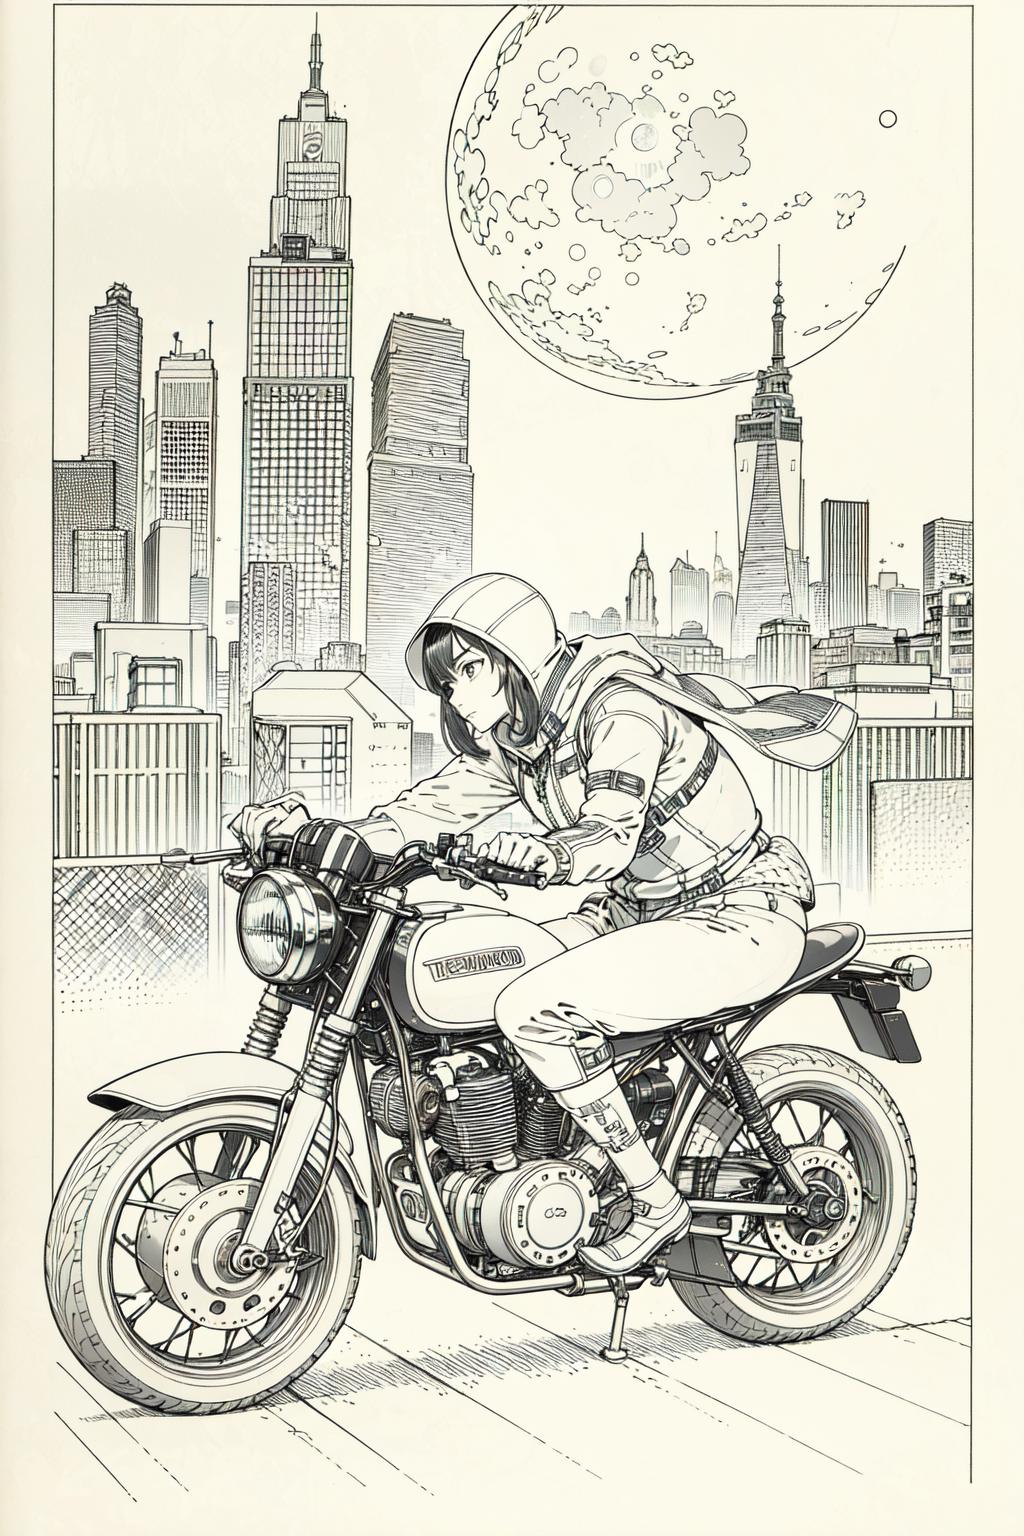 A woman riding a motorcycle in a futuristic cityscape.